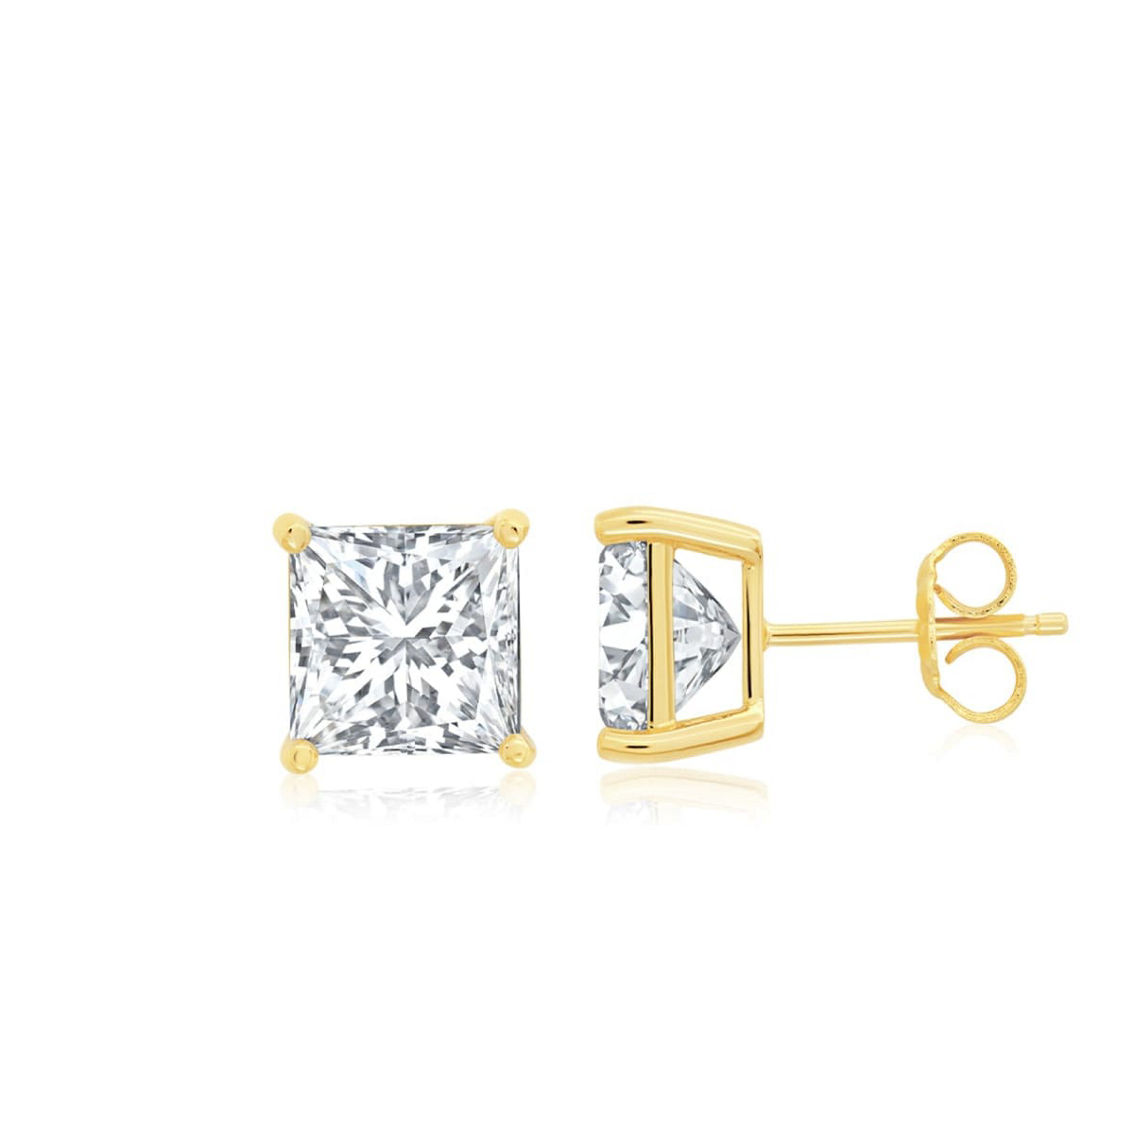 Crislu Square Cut Studs Finished in 18kt Yellow Gold - Image 2 of 2